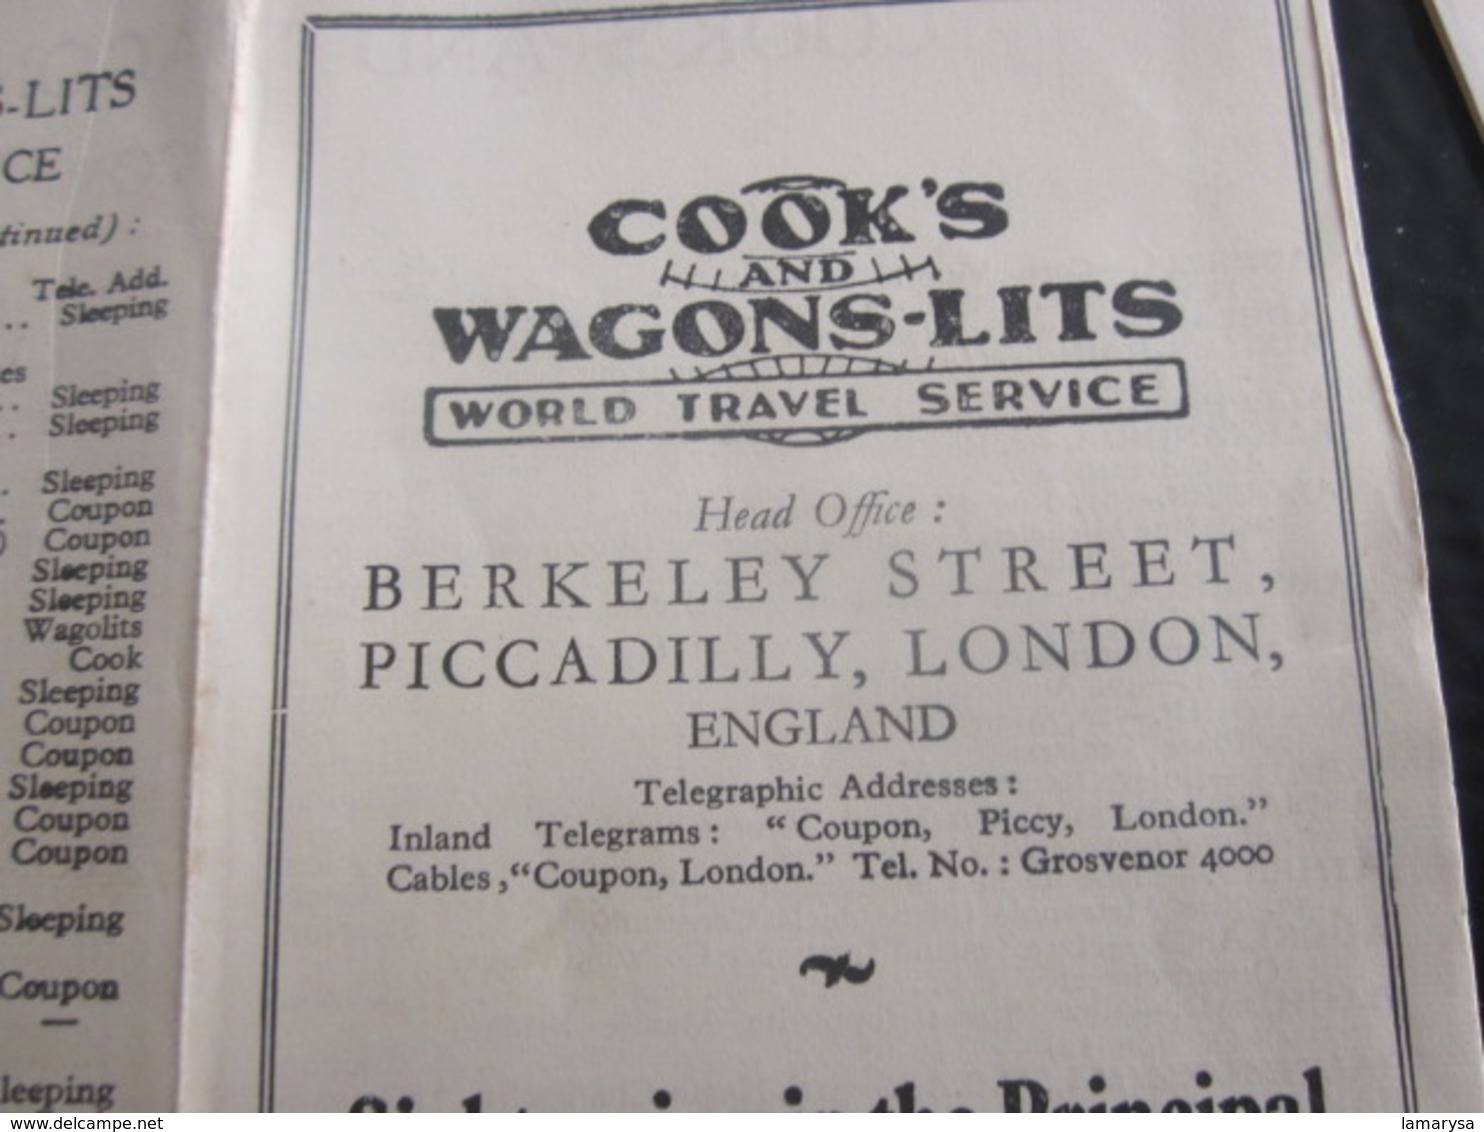 POCKET COOK'S & WAGONS-LITS WORLD TRAVEL SERVICE-COMPLETE LIST OF OFFICE BERKELEY PICCADILLY LONDON UK ENGLAND